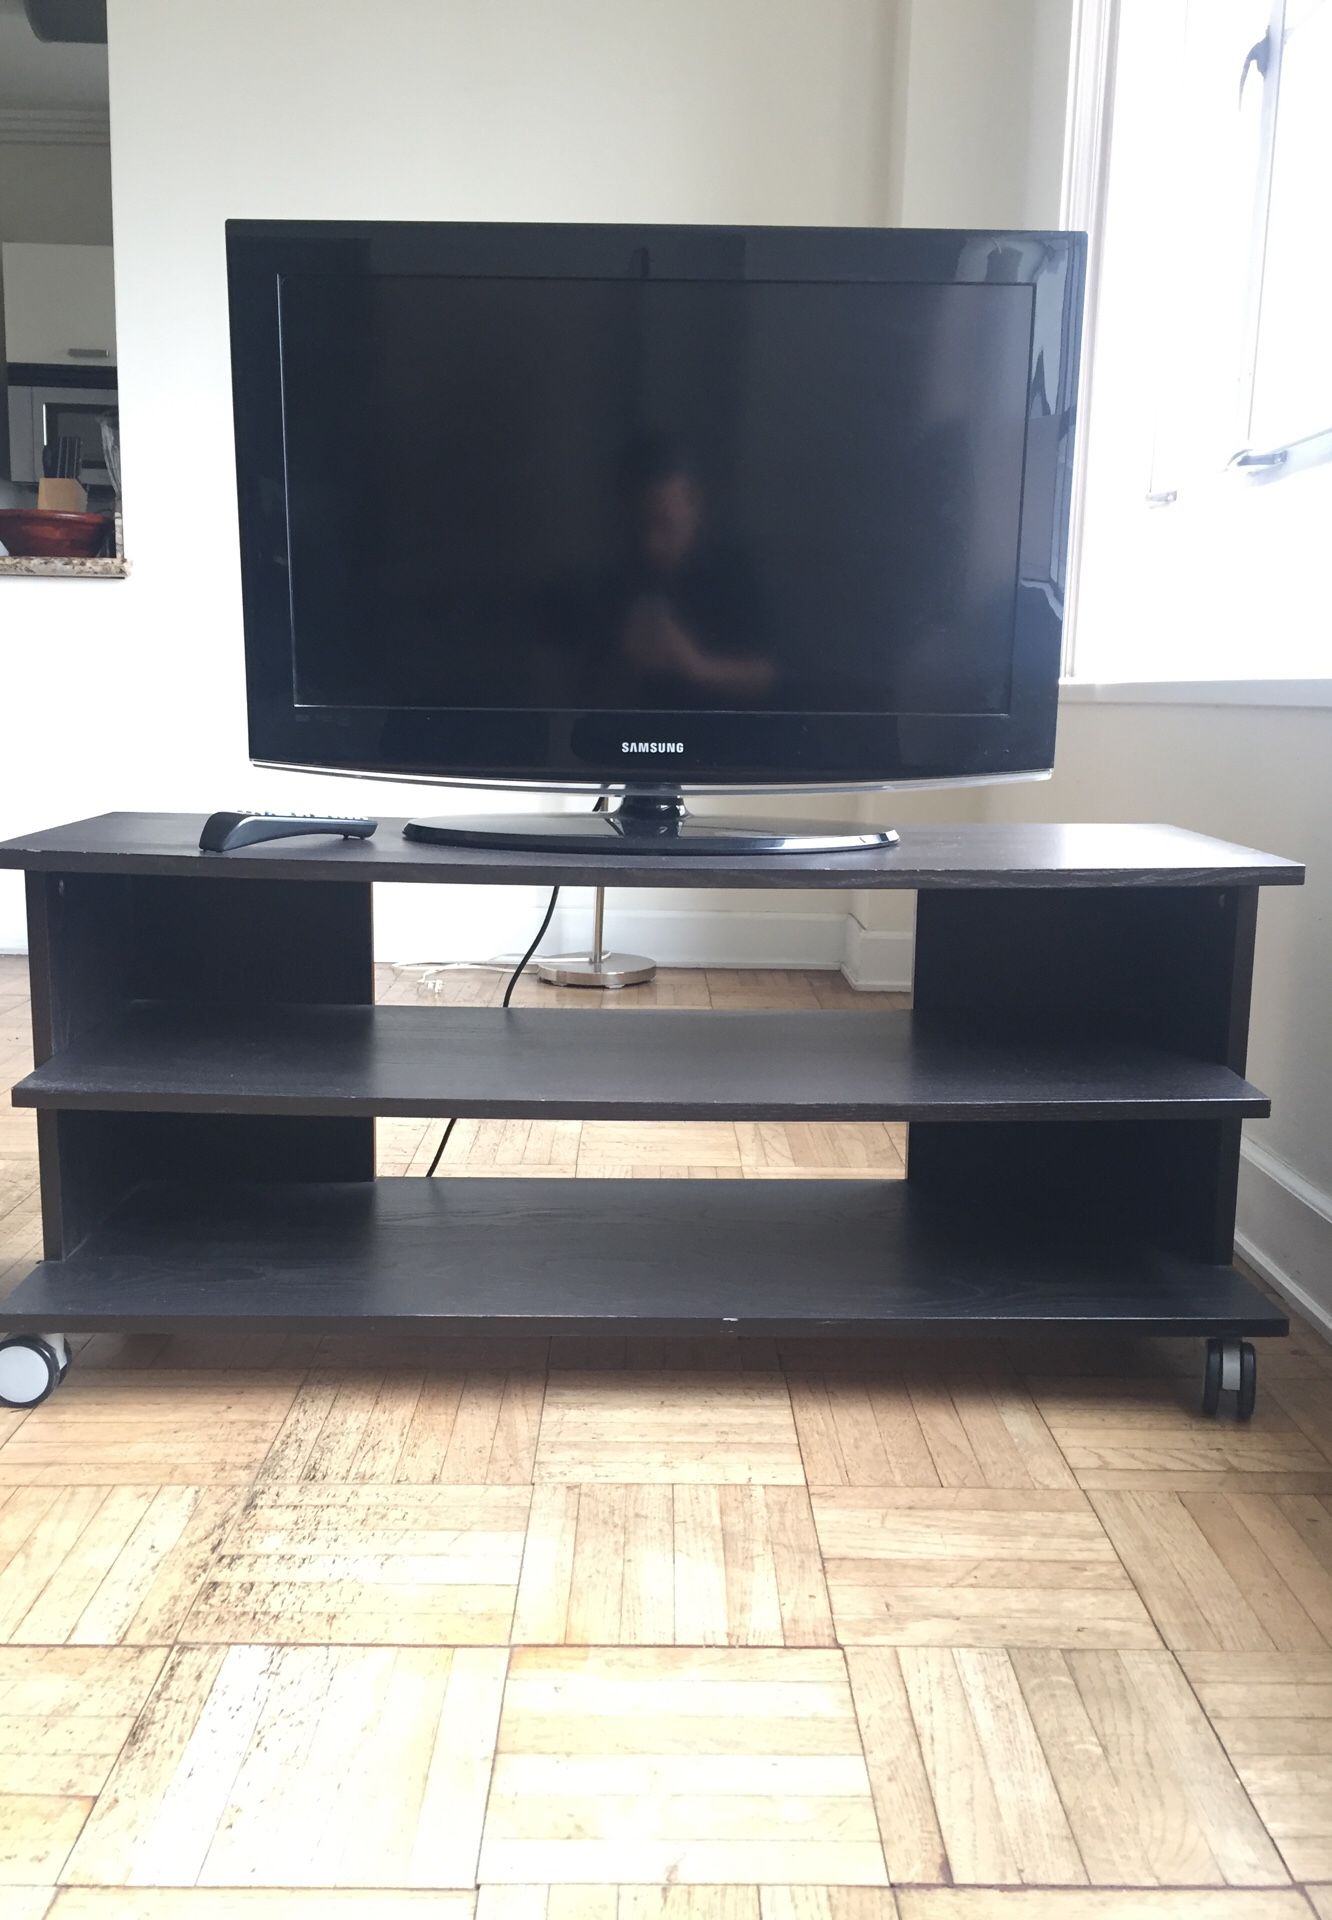 Buy a tv stand and get a free 30” Samsung tv